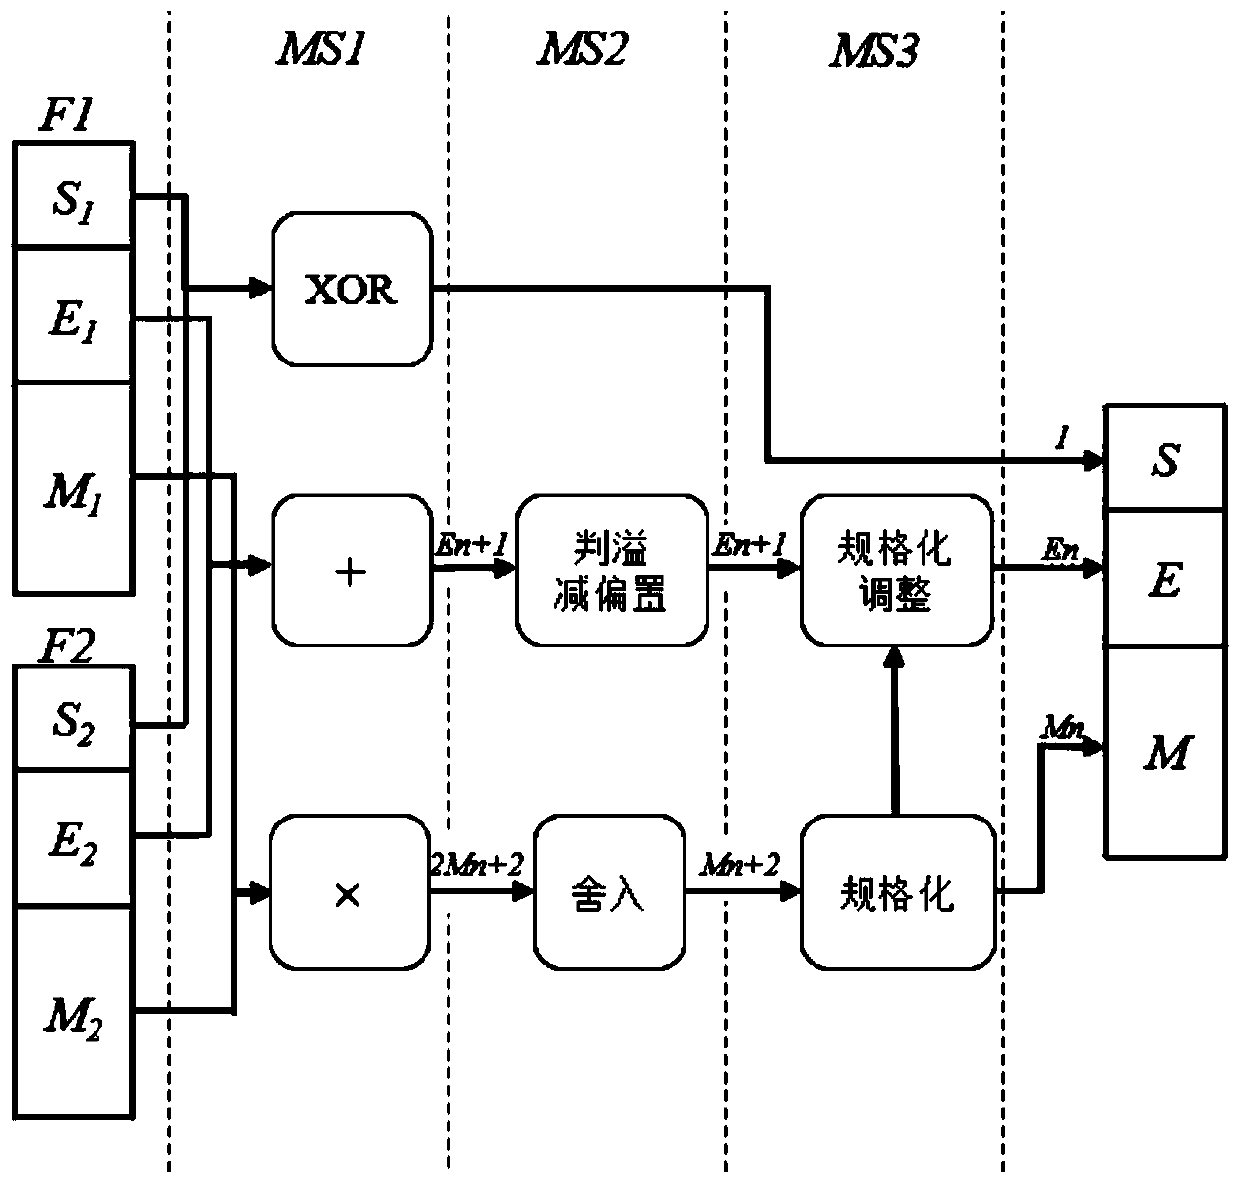 configurable floating point vector multiplication IP core based on an FPGA